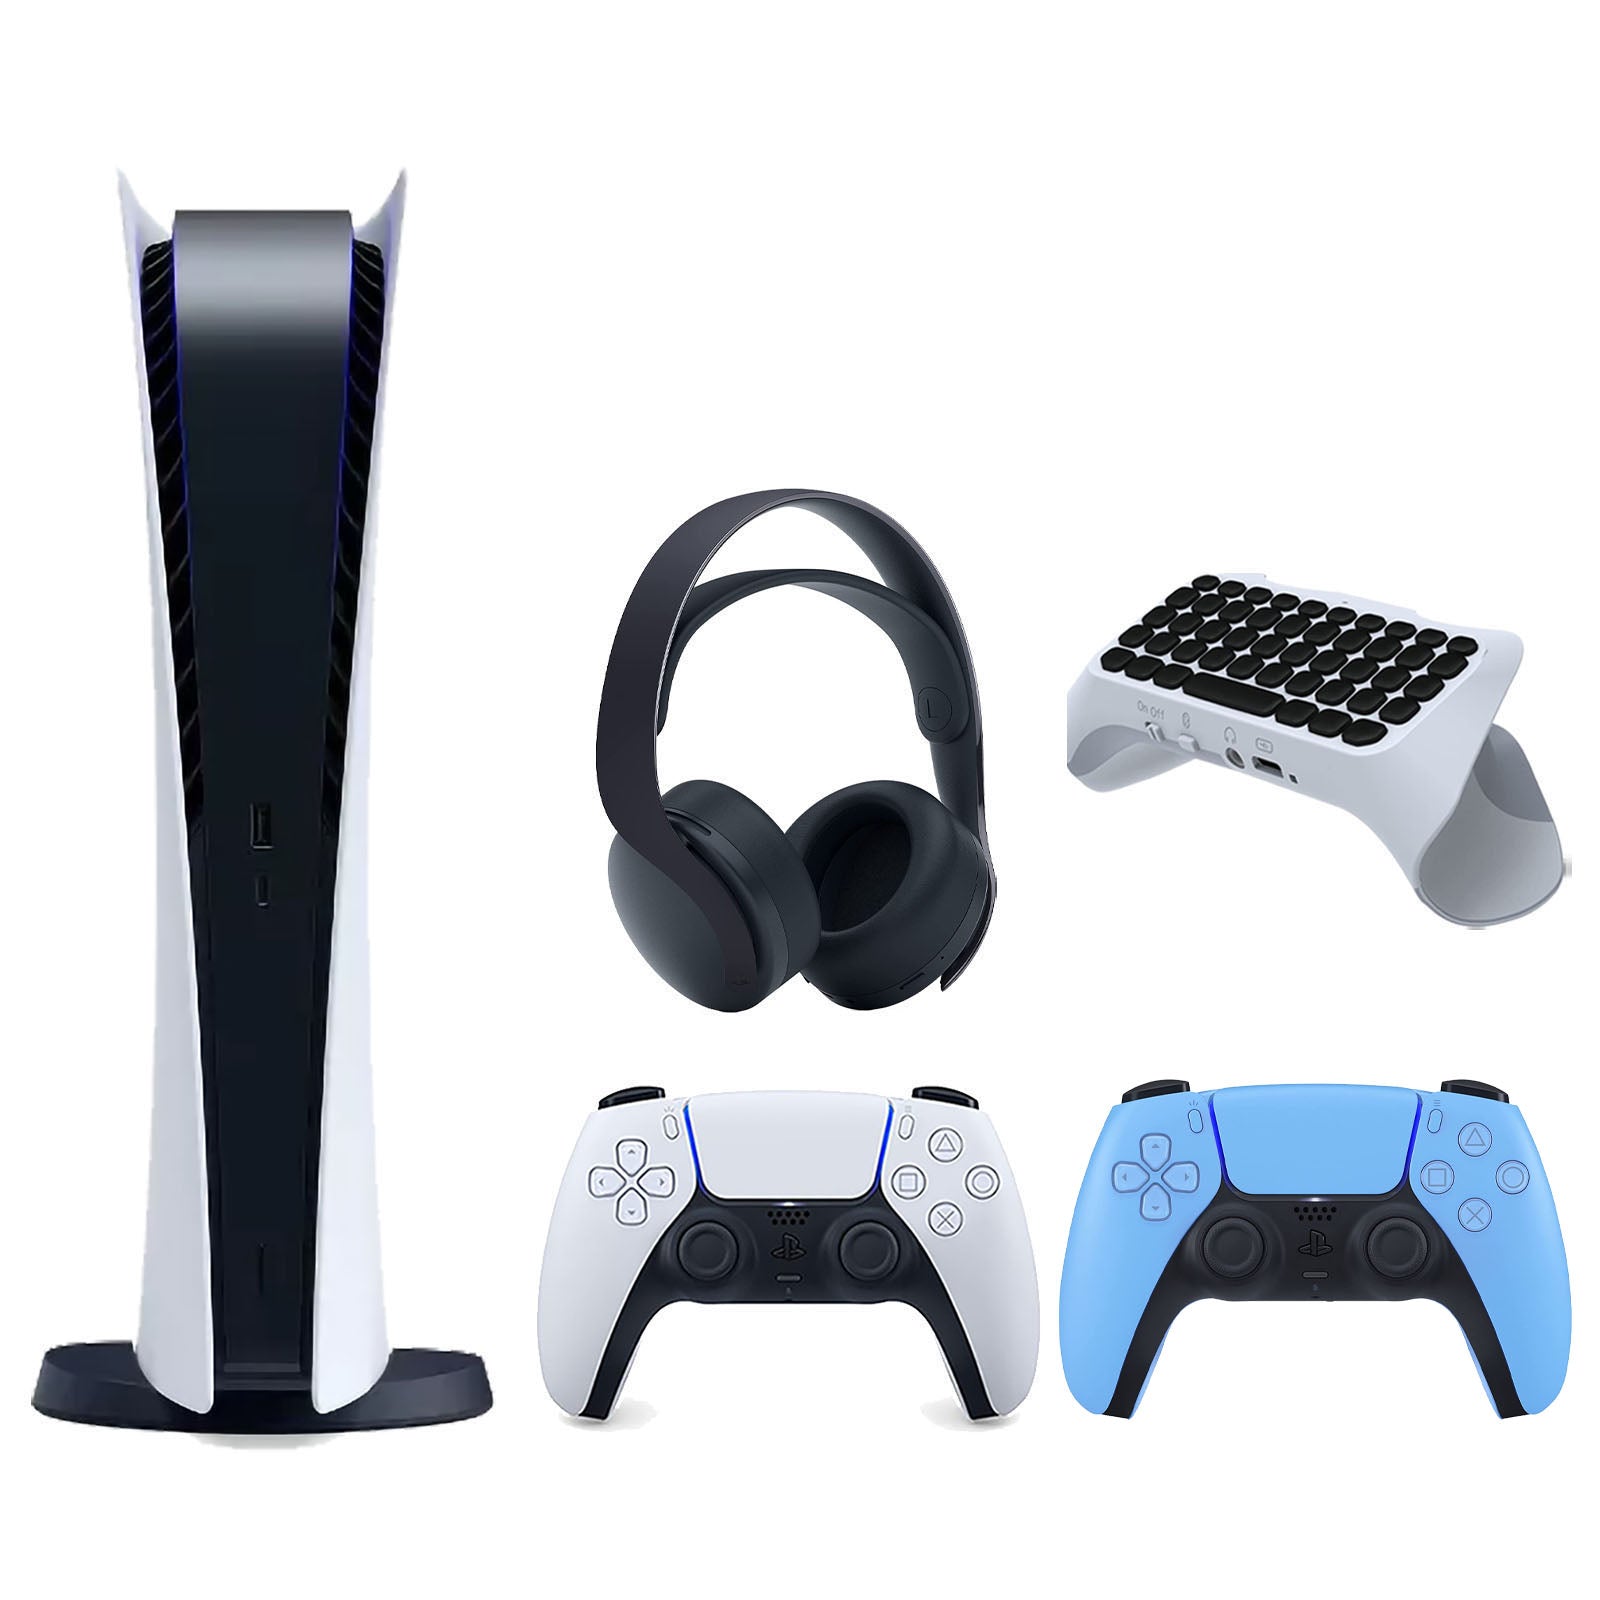 Sony Playstation 5 Digital Edition Console with Extra Blue Controller, Black PULSE 3D Headset and Surge QuickType 2.0 Wireless PS5 Controller Keypad Bundle - Pro-Distributing